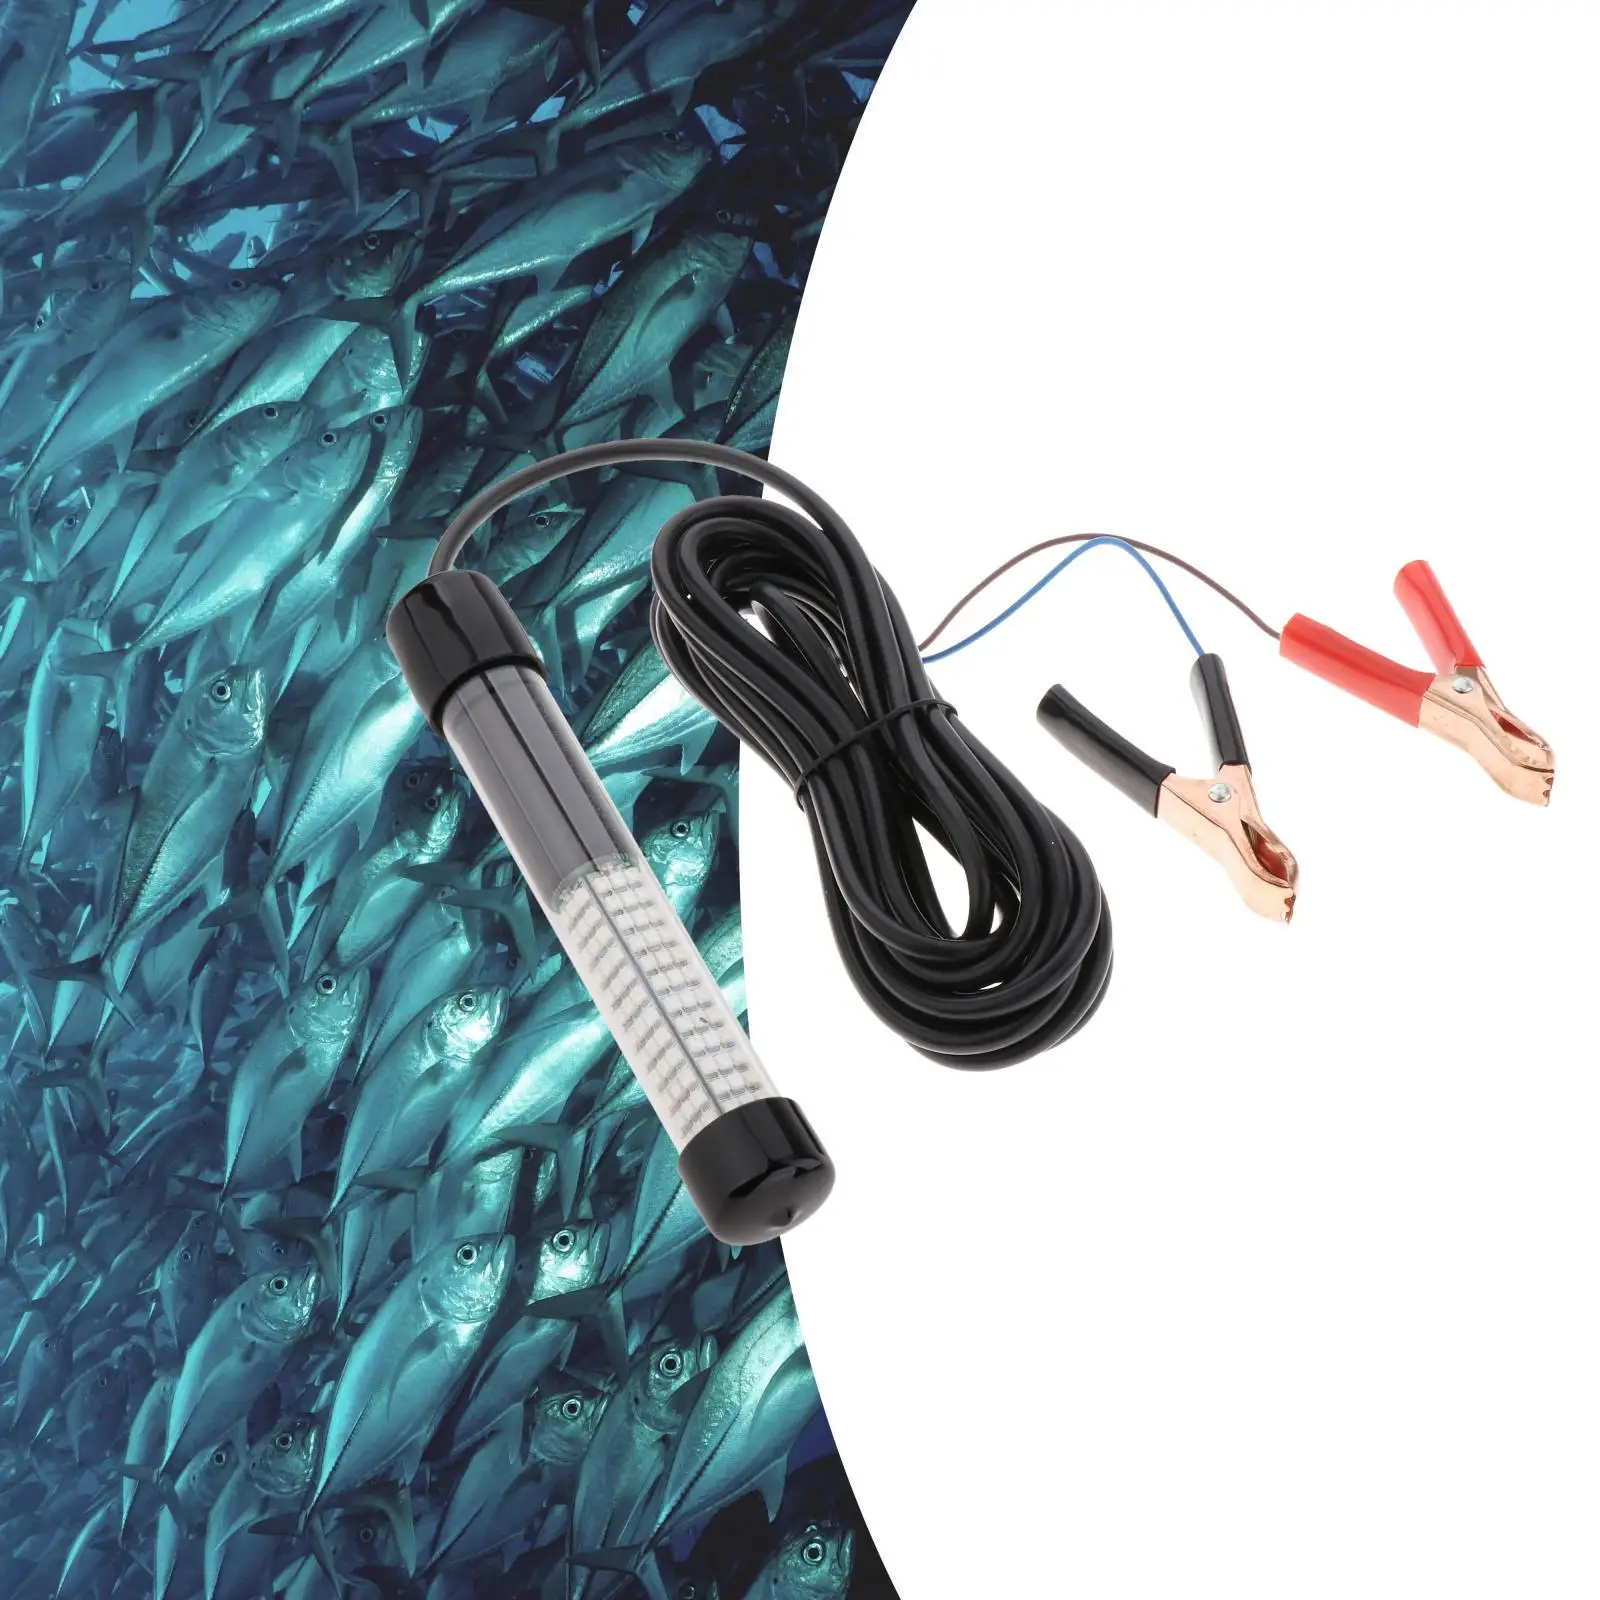 180 LEDs Submersible Fishing Light 5M Cord Super Bright 12V Water Waterproof Crappie for Freshwater Ice Fishing